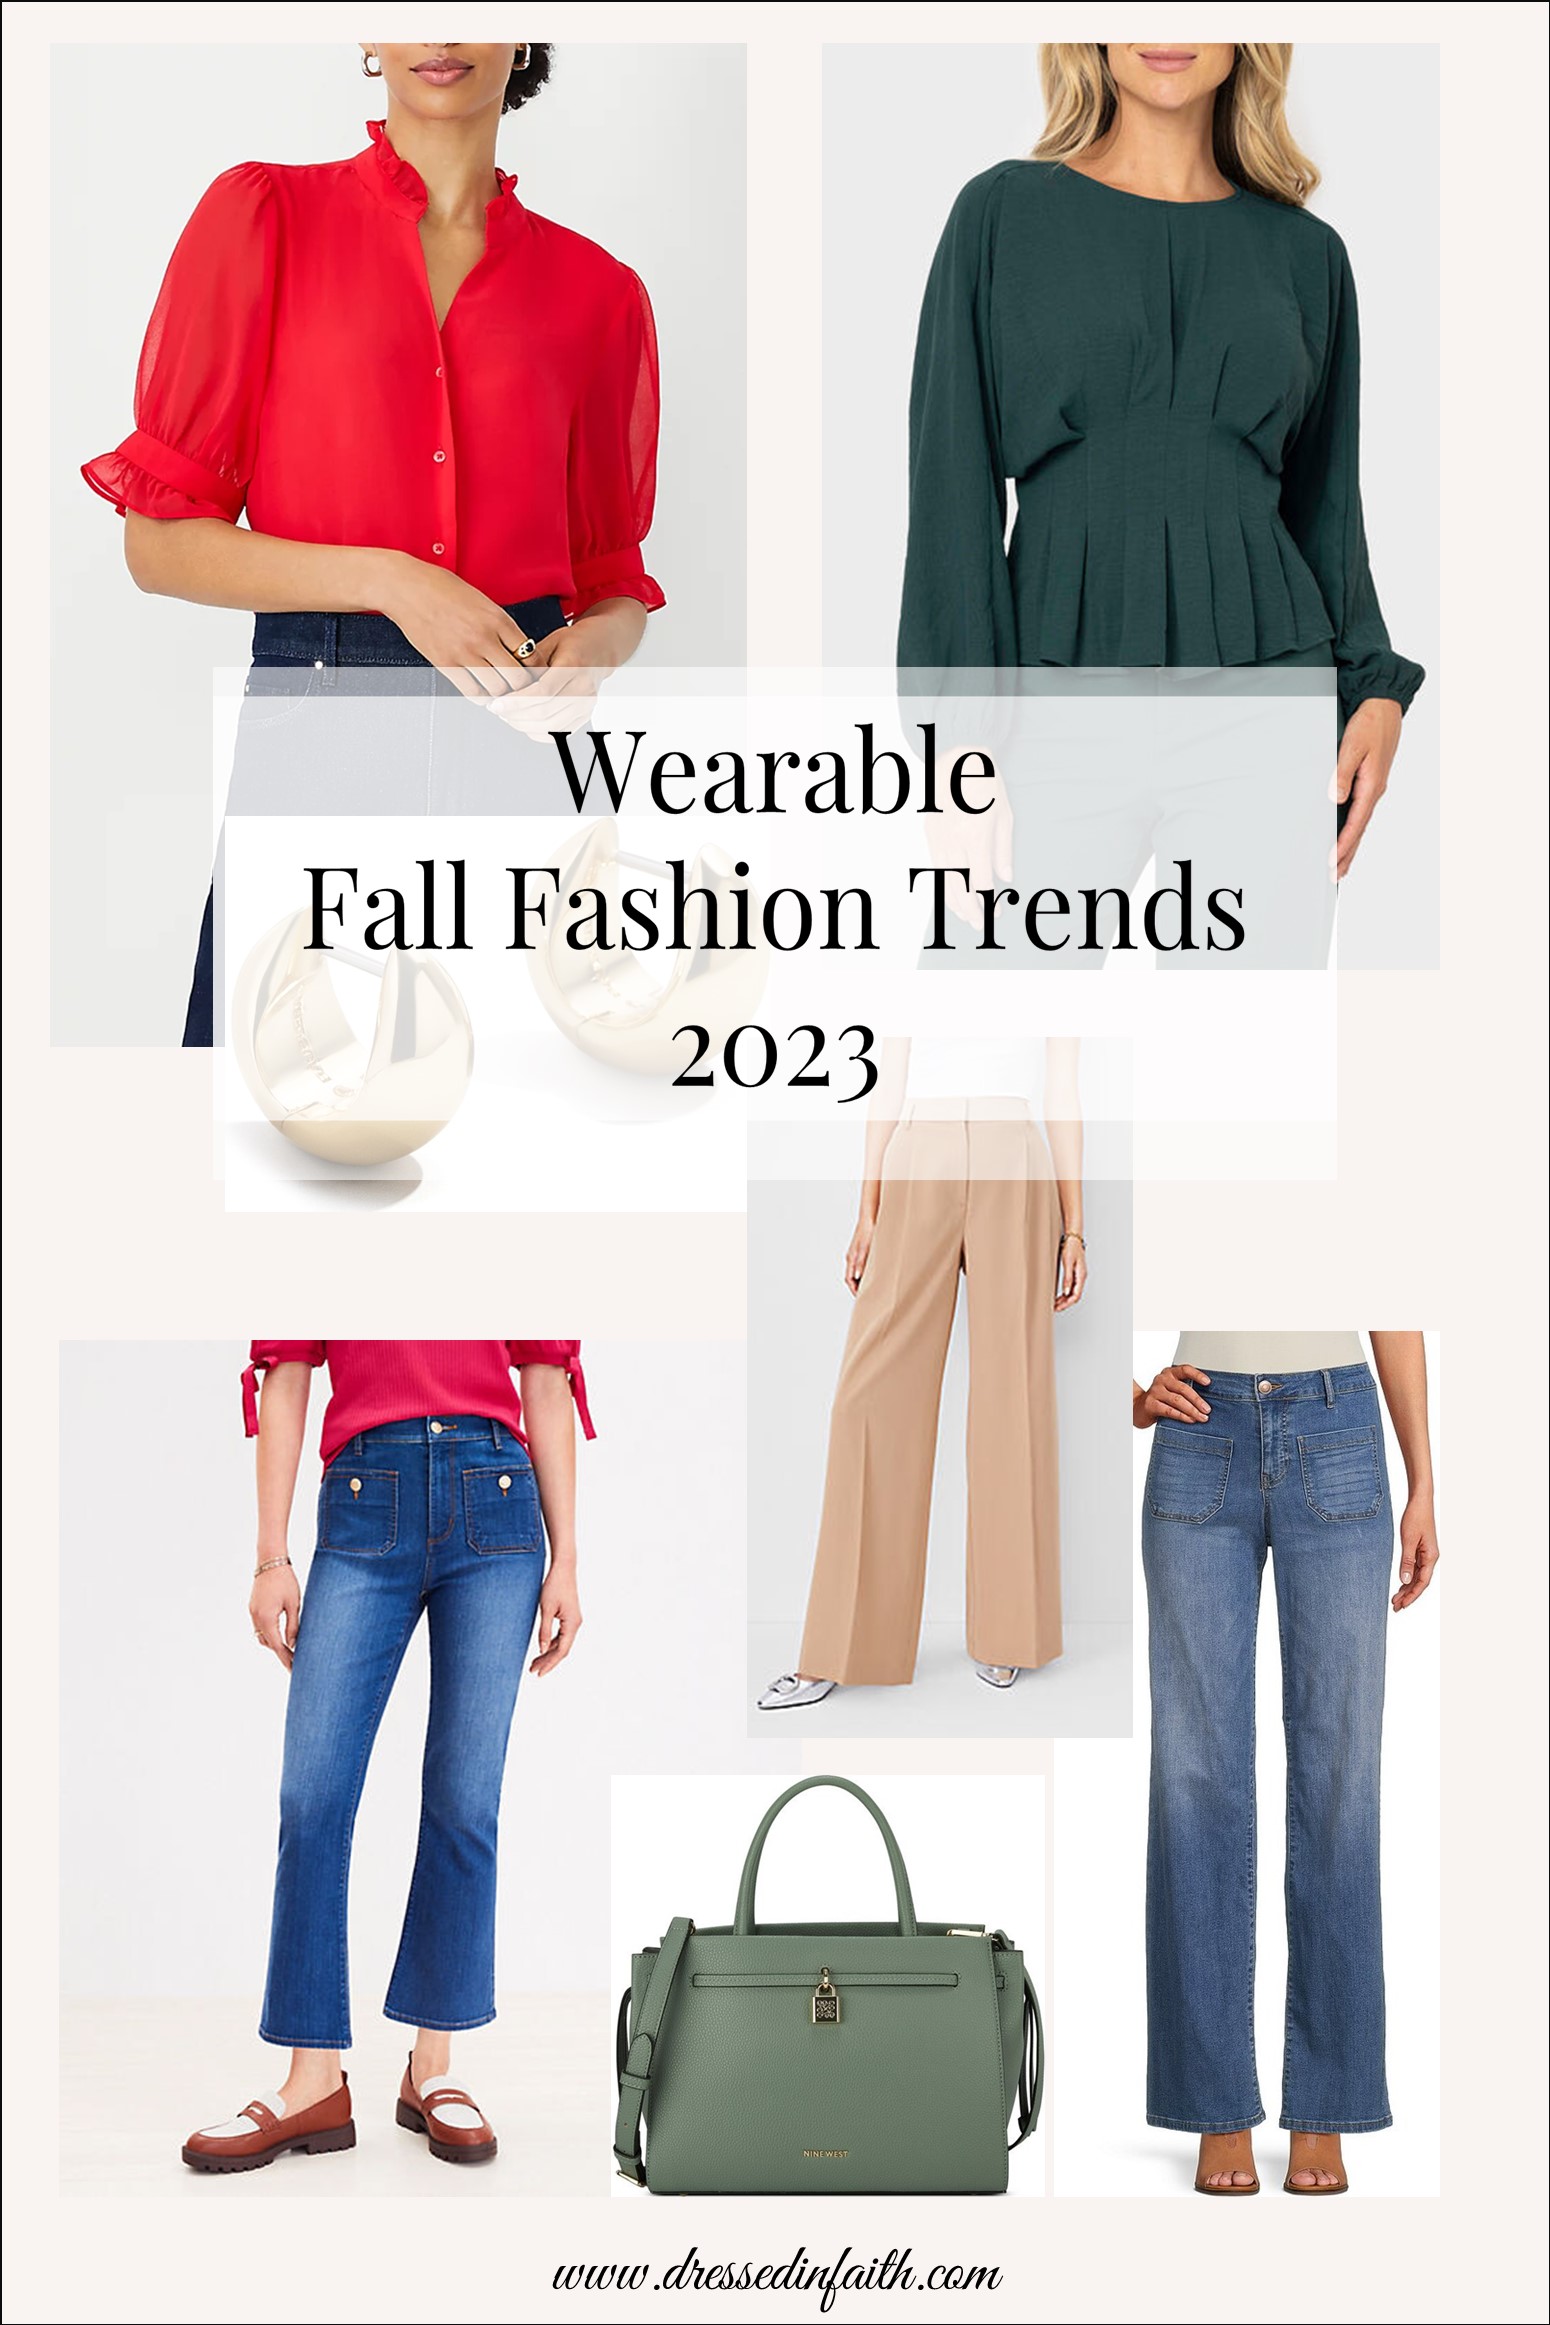 Wearable Fall Fashion Trends 2023